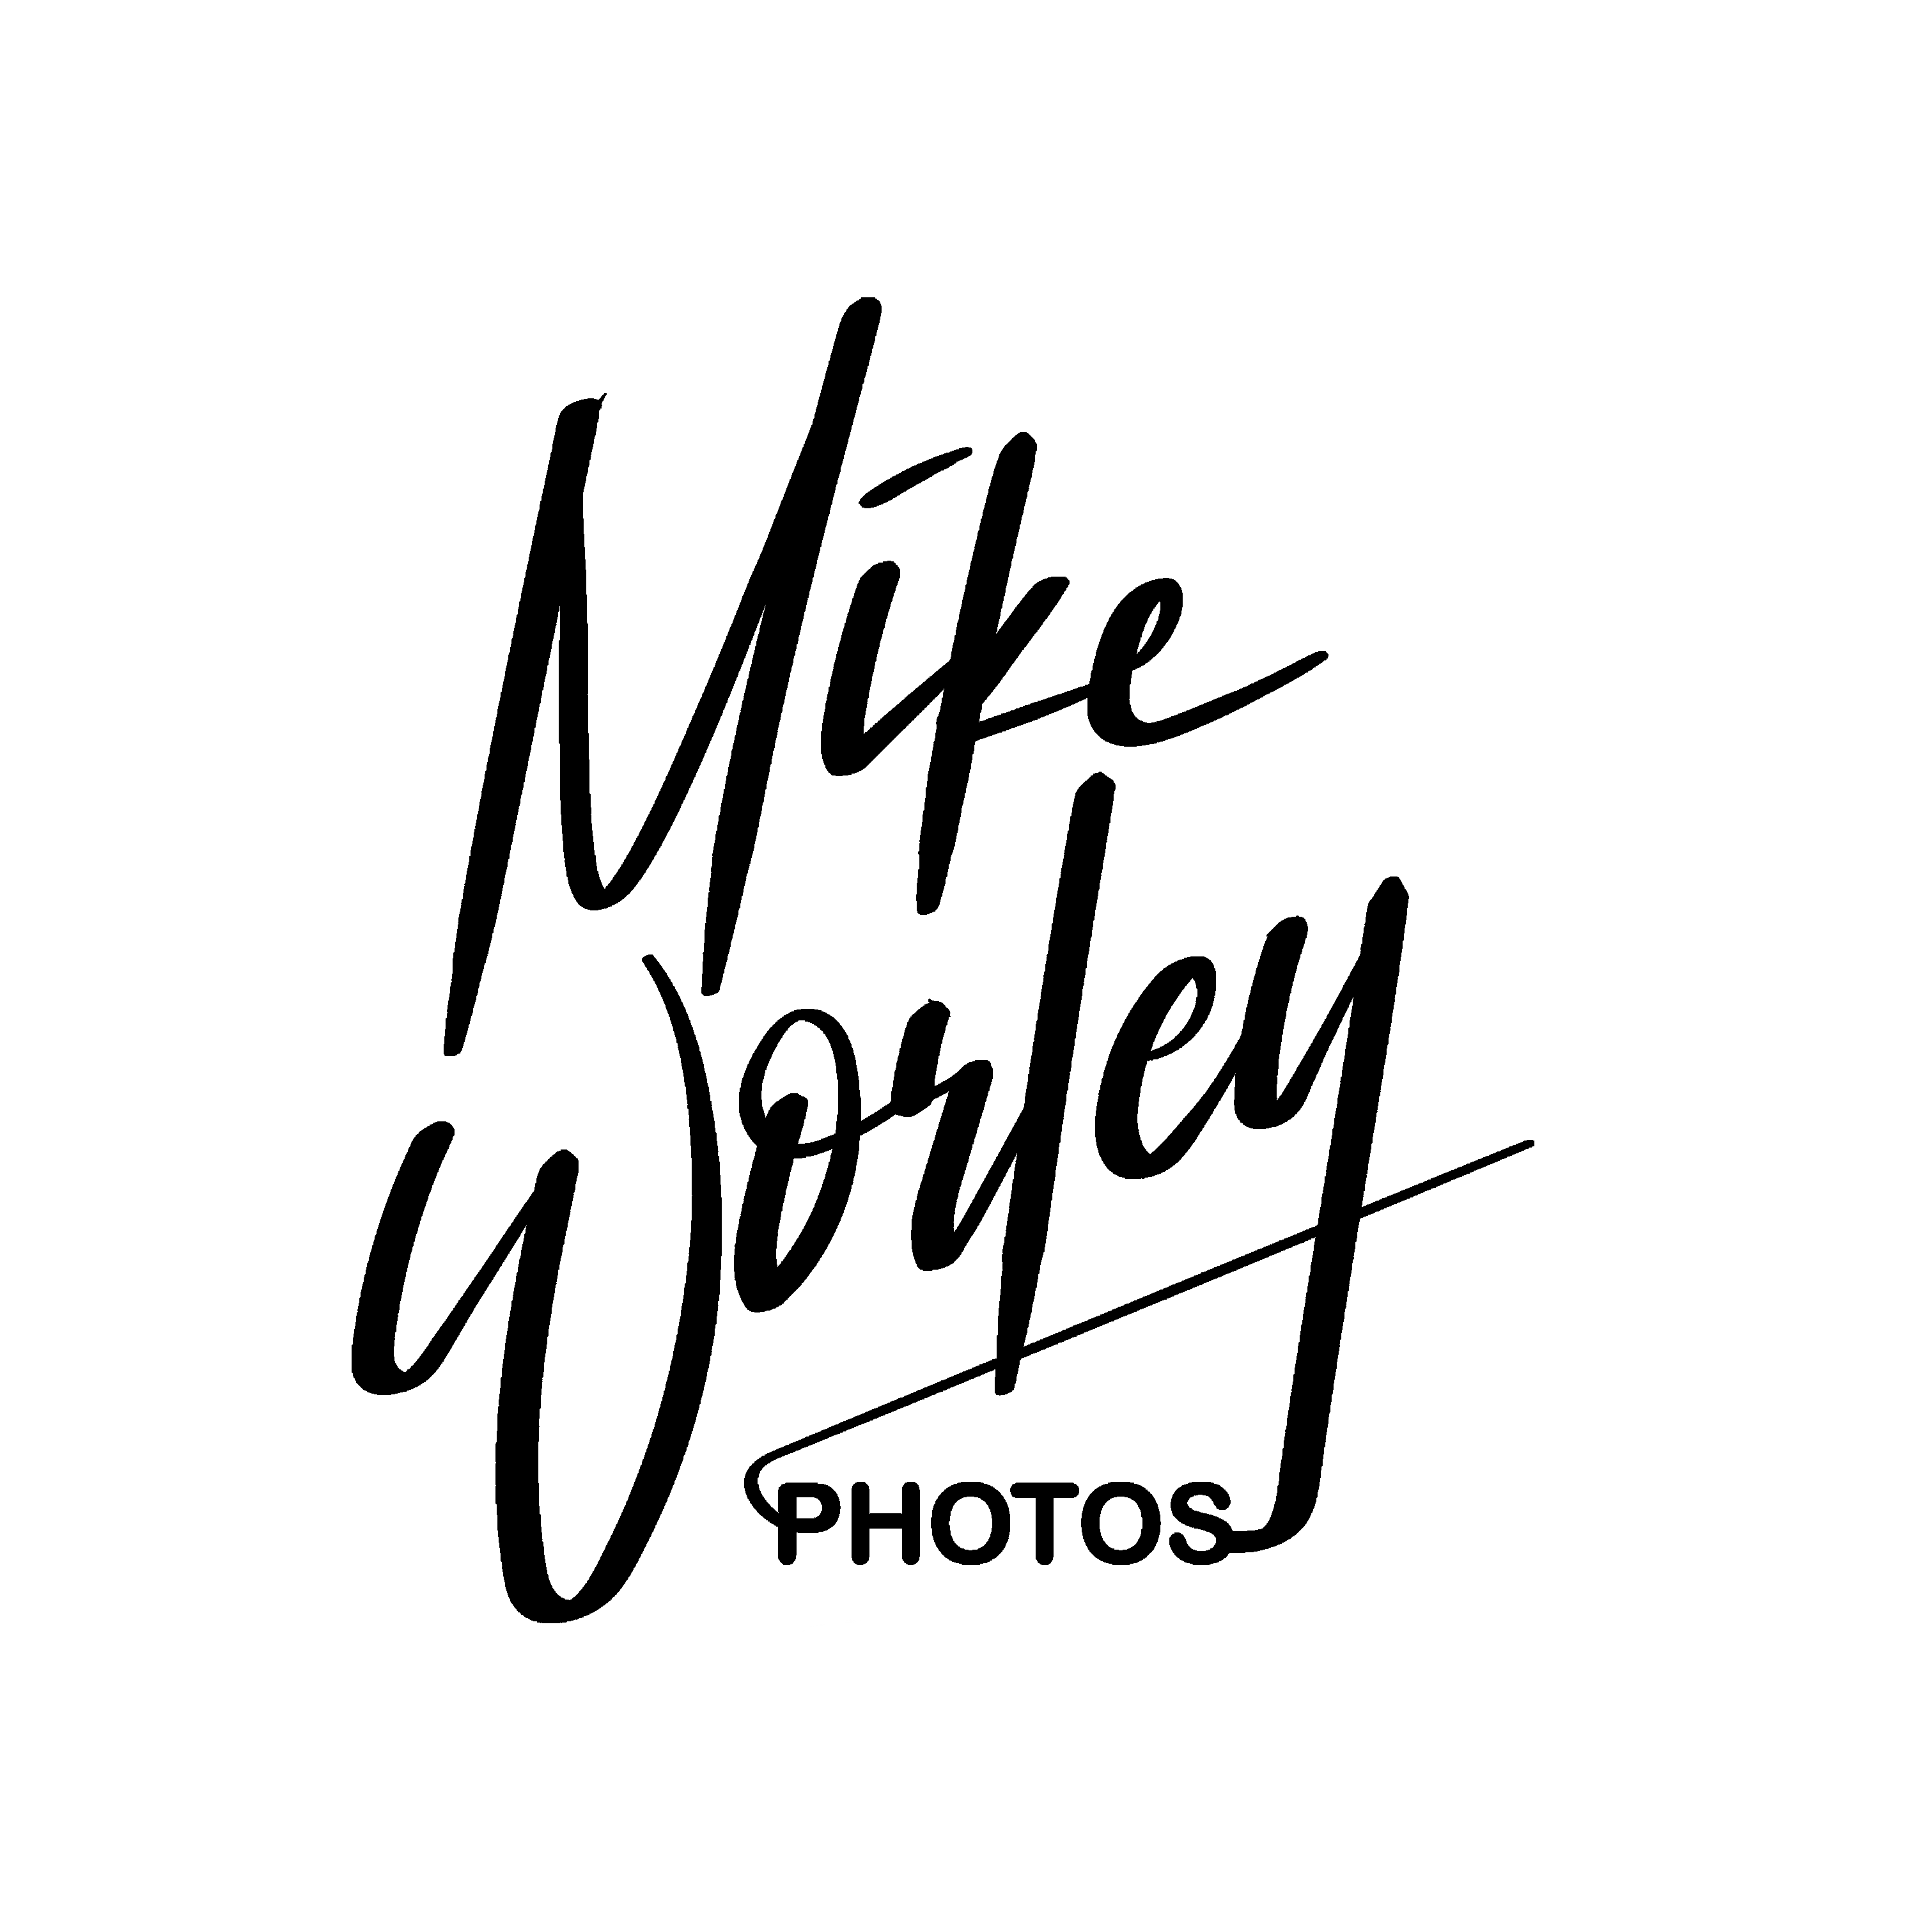 Mike Worley Photos